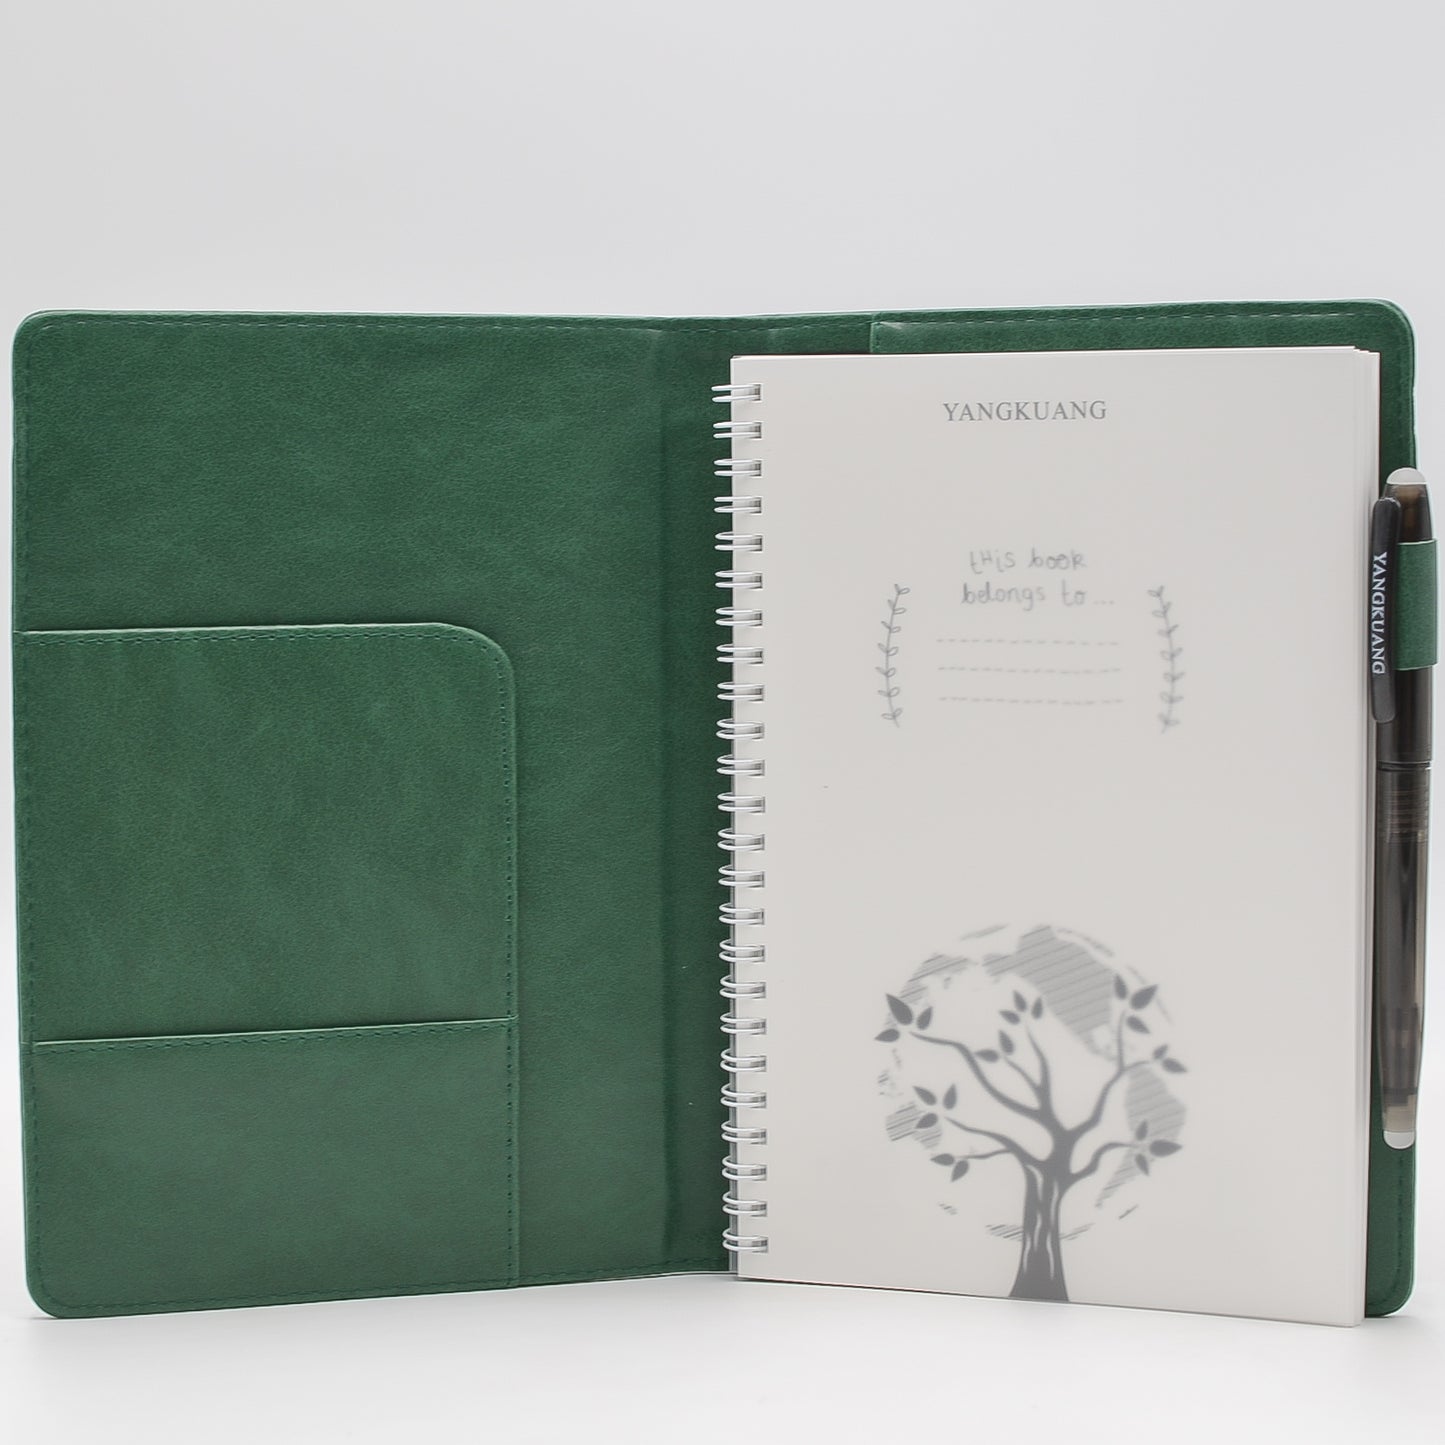 Journals: Re-useable Set includes Faux Leather Cover, Reuse-able Journal